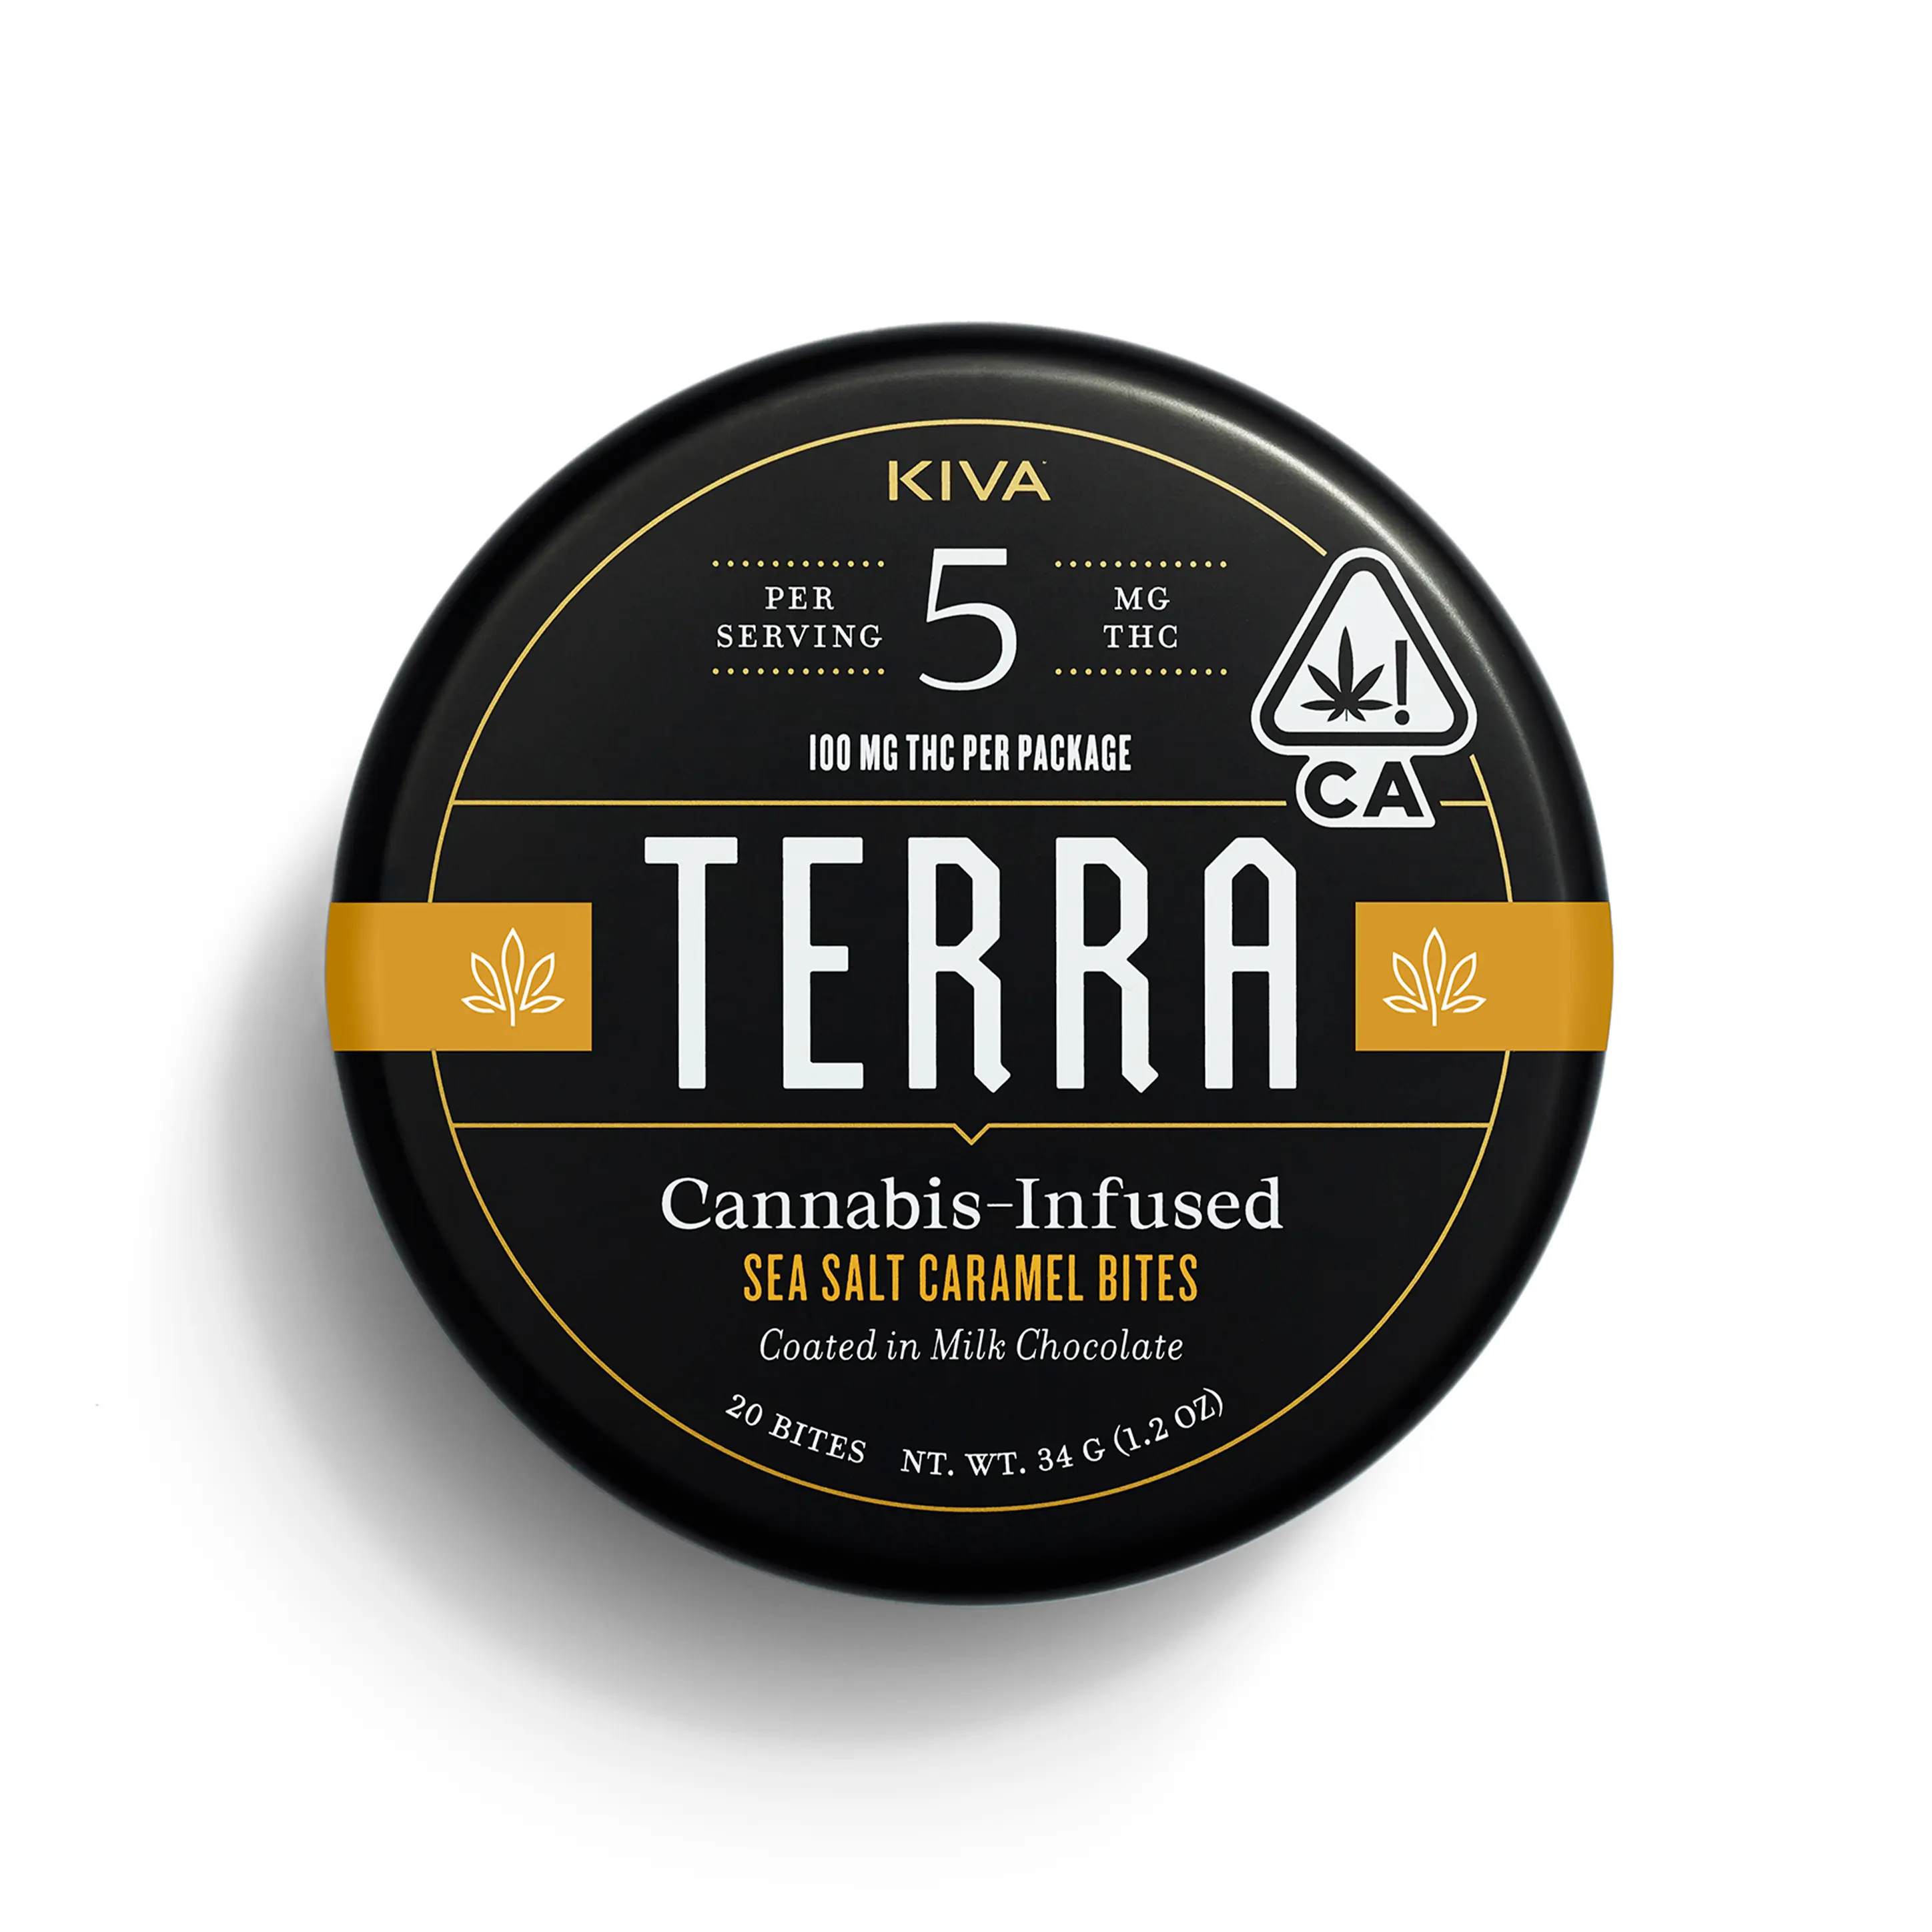 product preview image for Terra Chocolate-Covered Sea Salt Caramel Bites